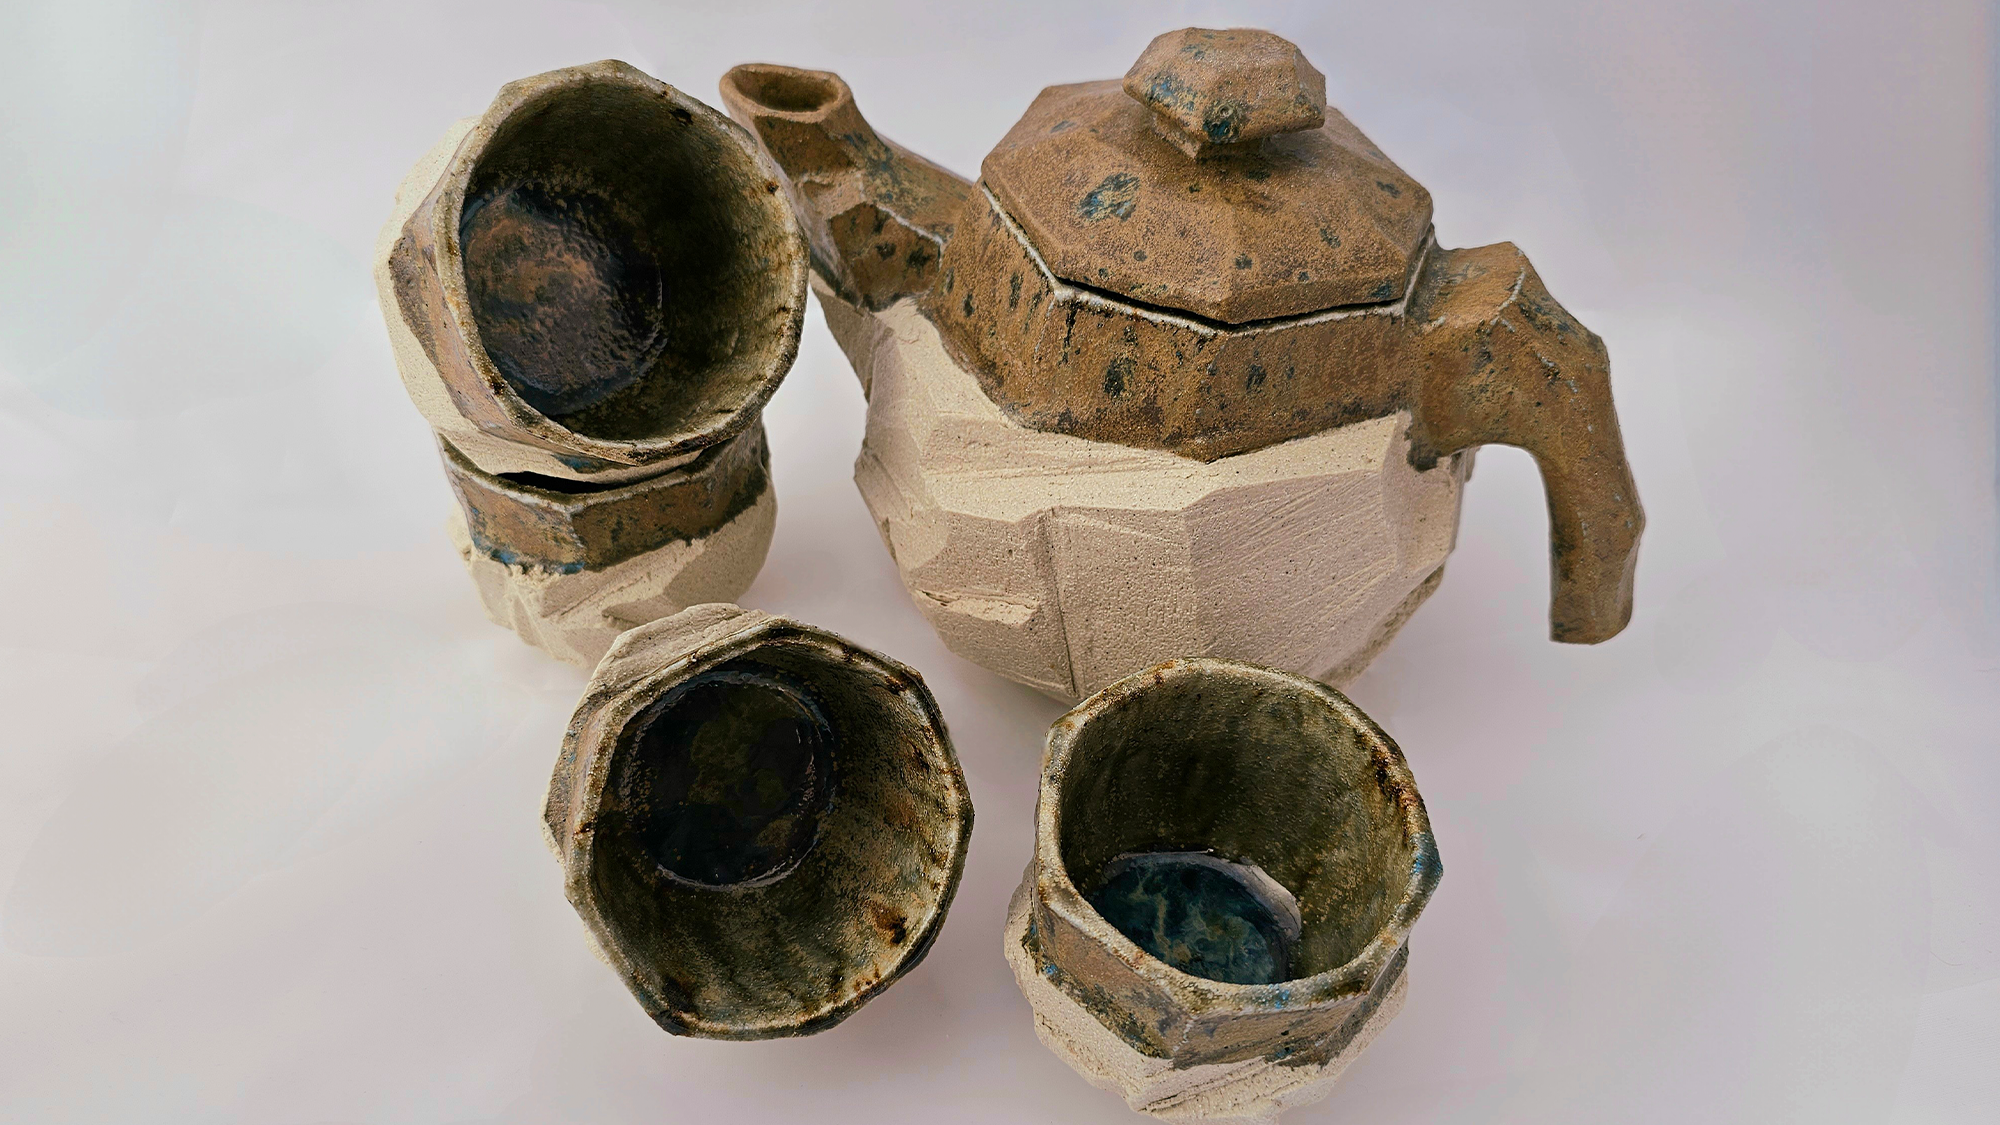 A picture of a ceramic teapot and cups, created by Fox Ward